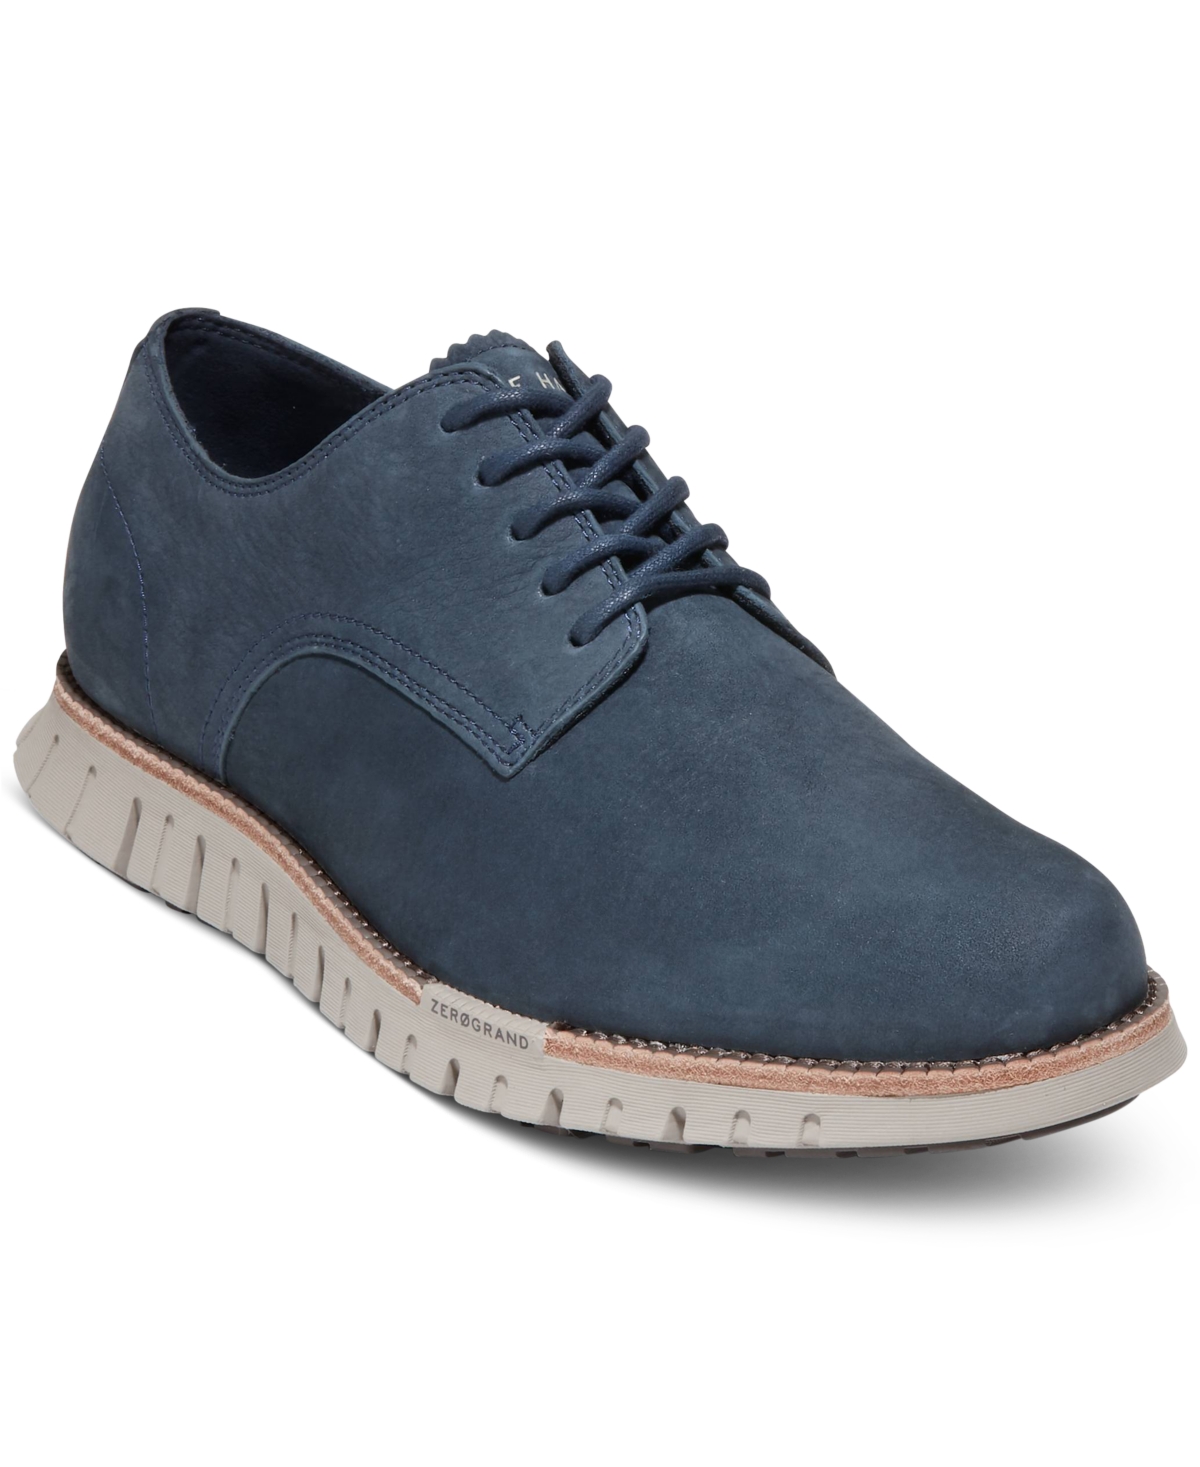 Shop Cole Haan Men's Zerøgrand Remastered Lace-up Oxford Dress Shoes In Navy Blazer Nbk,paloma